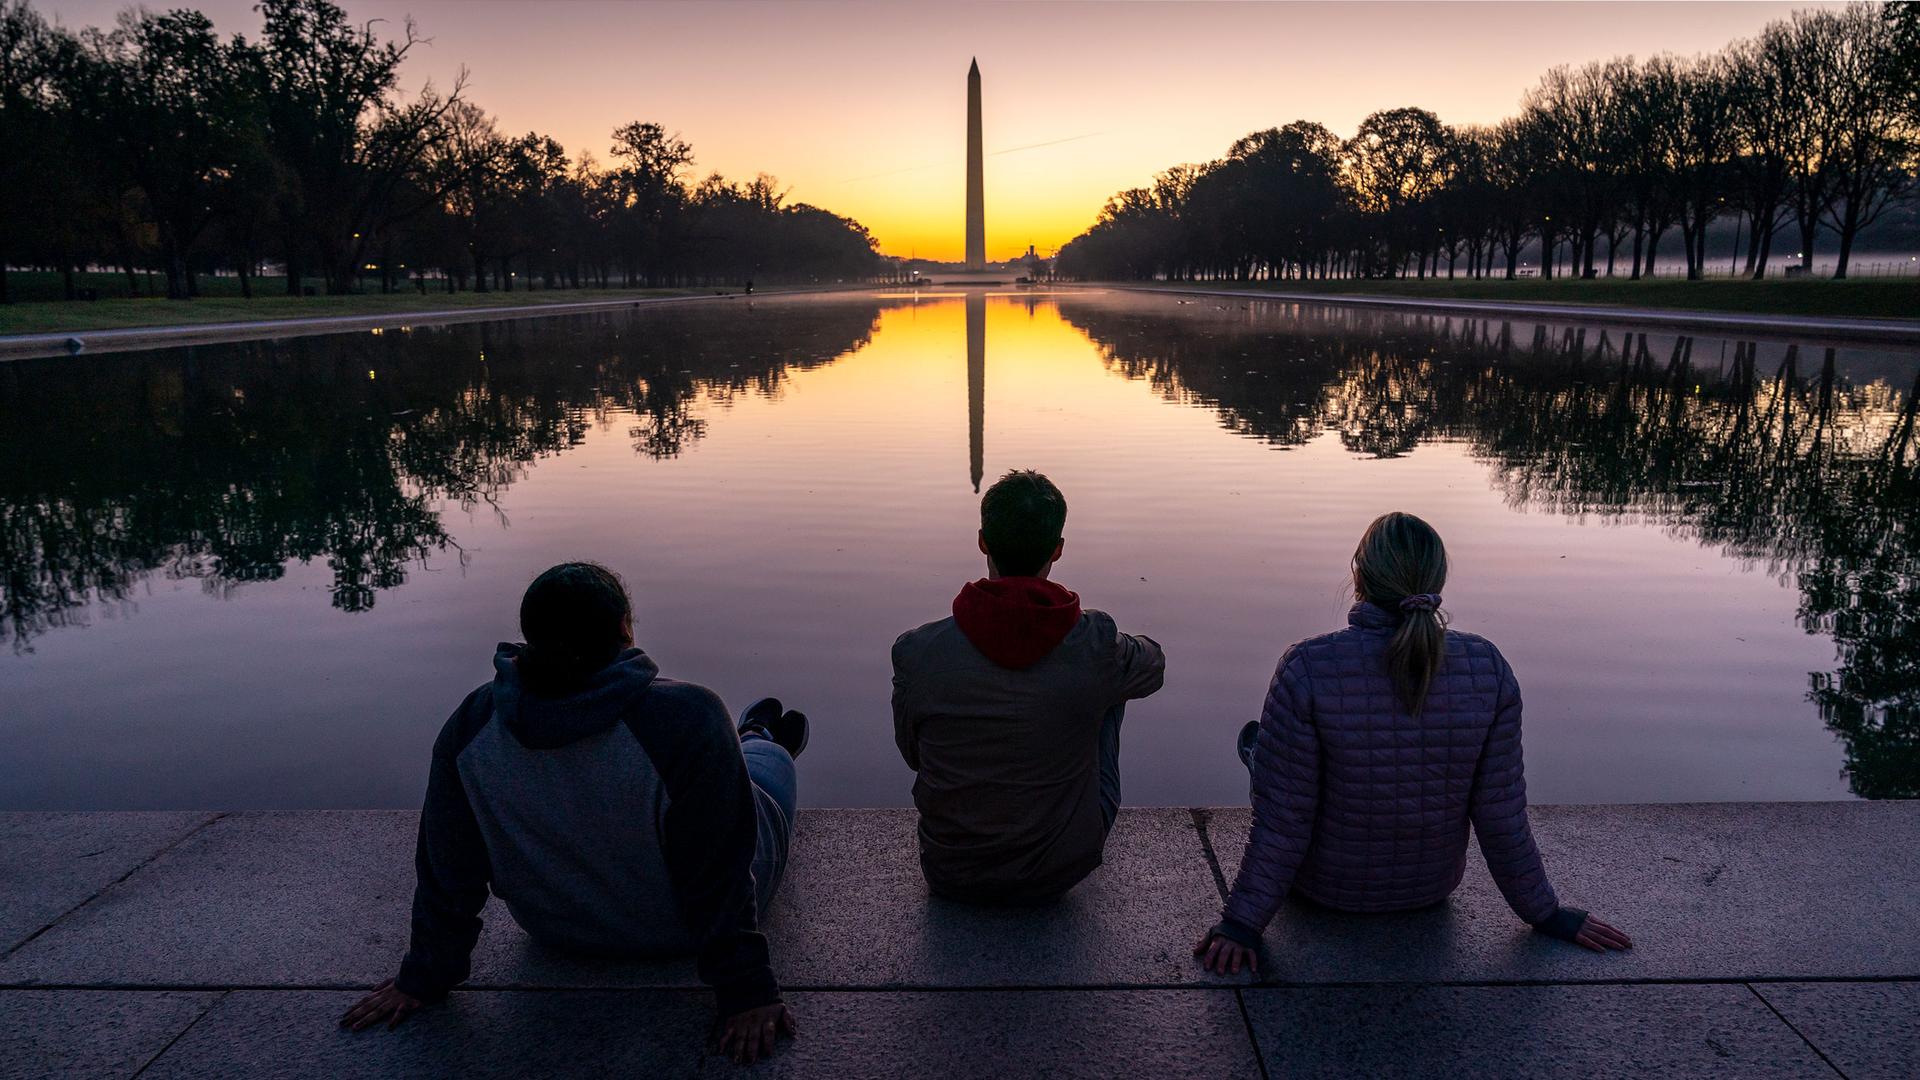 Three people are shown sitting on the ground in front of a long reflecting pool with the Washington Monument in the distance as the sun comes up.